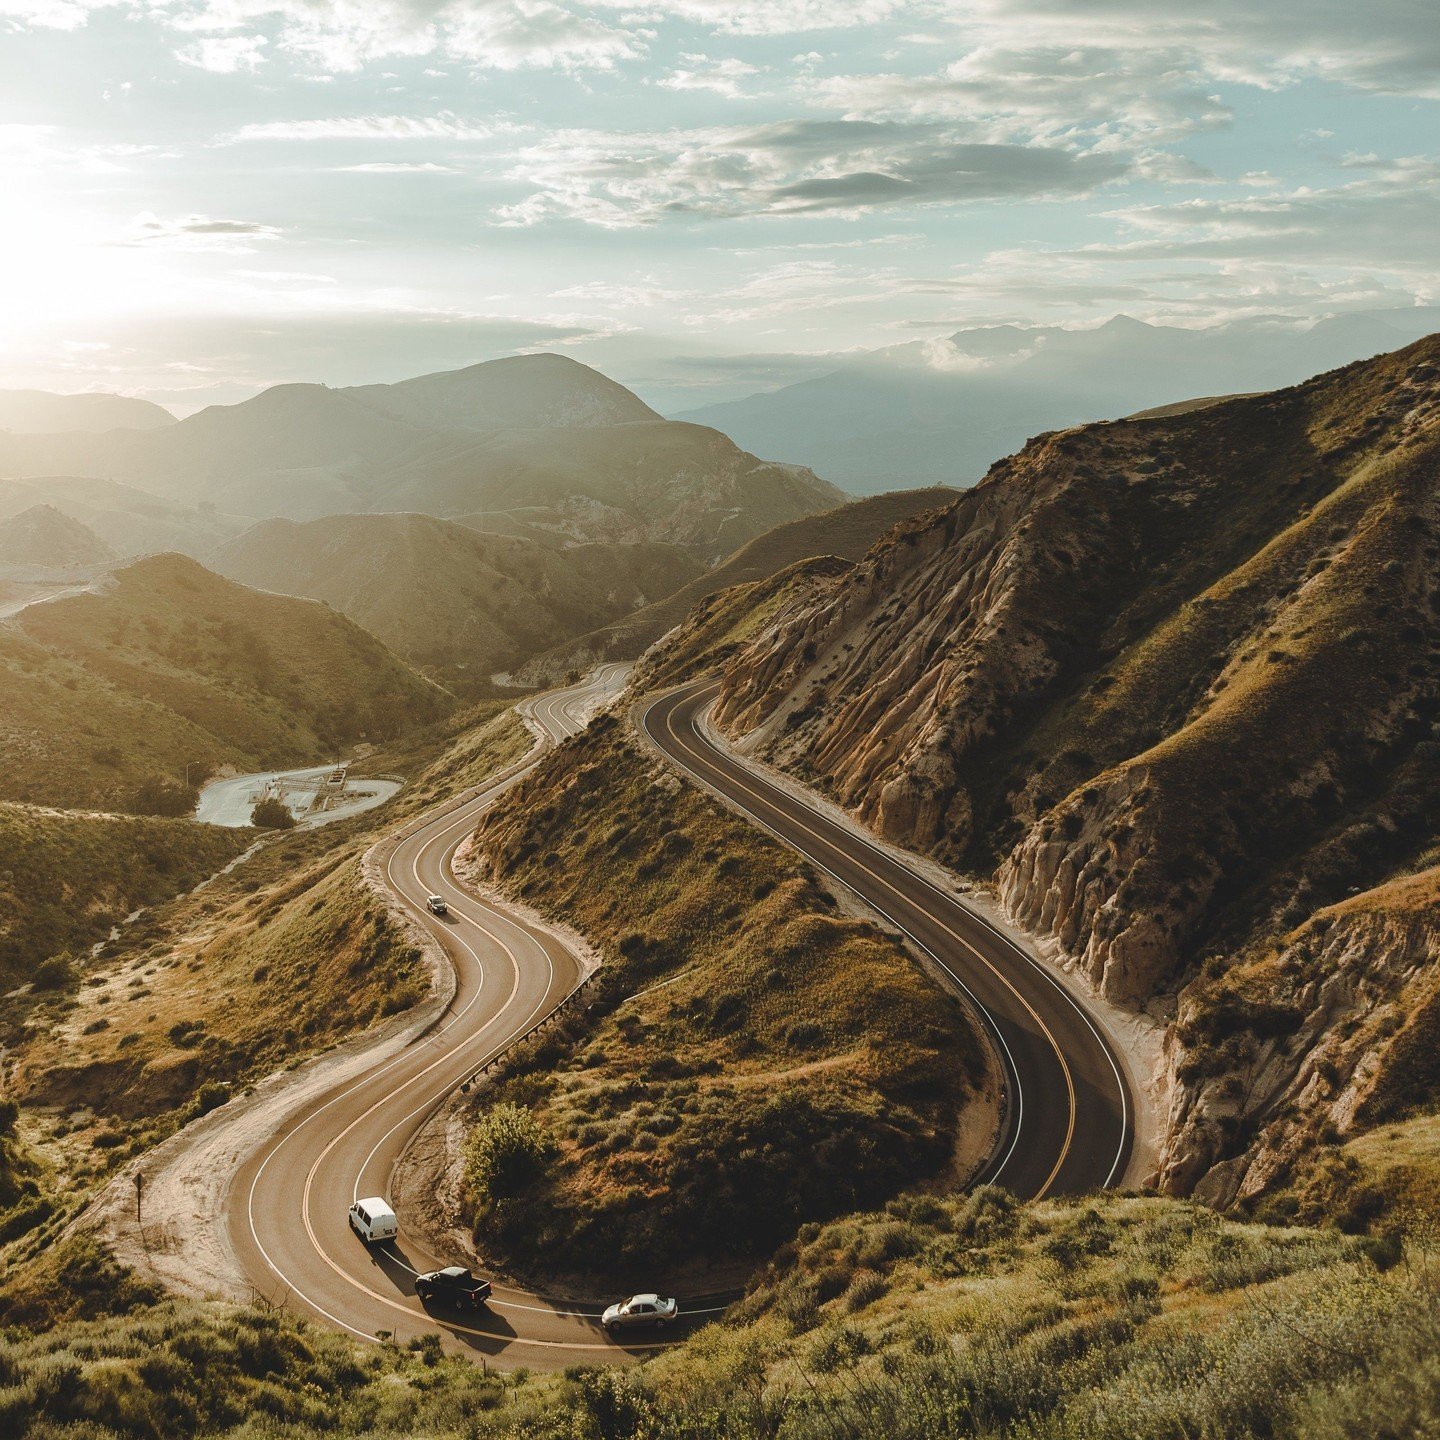 Day or night there's never a wrong time to tackle California's Grimes Canyon.⁠
⁠
&quot;It&rsquo;s an easy, flowing drive cutting between hillsides until very suddenly it isn&rsquo;t. The descent into Fillmore is, as the locals say, &ldquo;gnarly&rdqu